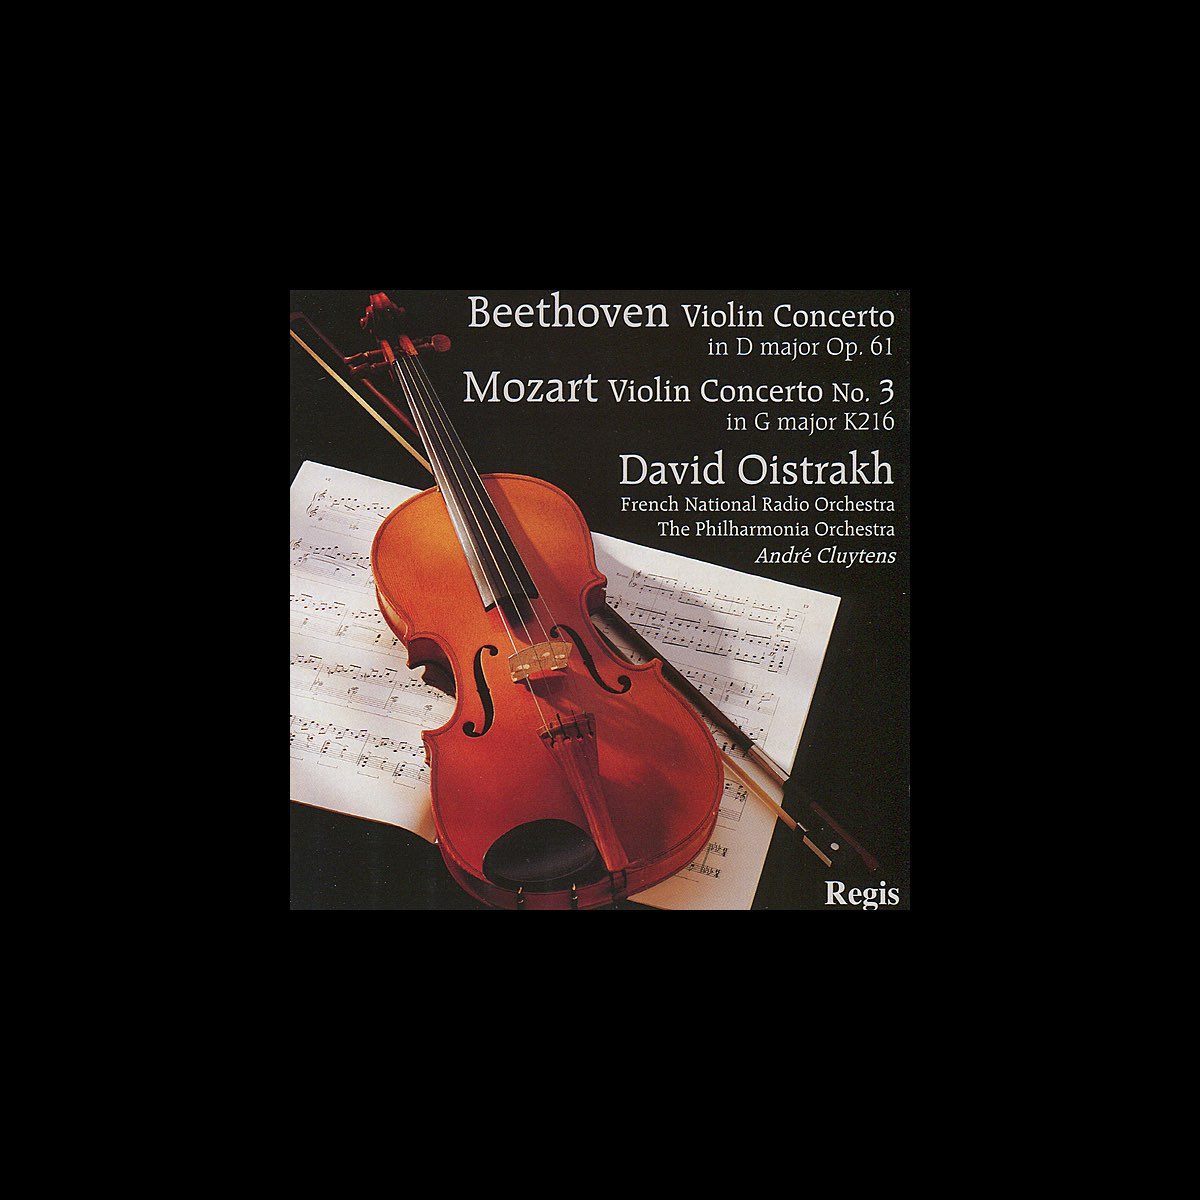 Mozart: Violin Concerto No. 3 - Beethoven: Violin Concerto in D Major -  Album by David Oistrakh, French National Radio Orchestra, Philharmonia  Orchestra & André Cluytens - Apple Music